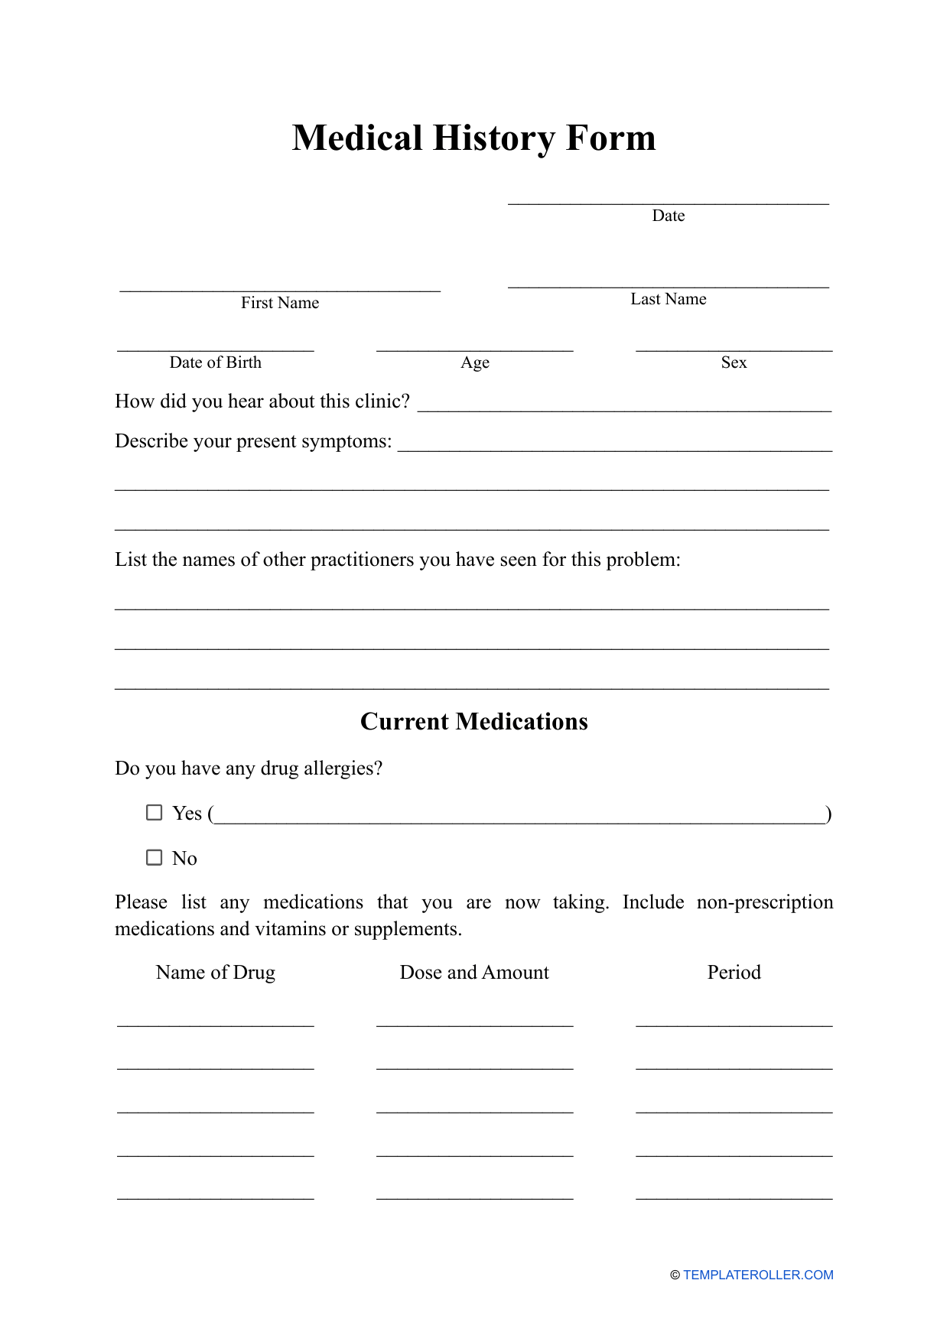 Medical History Form, Page 1